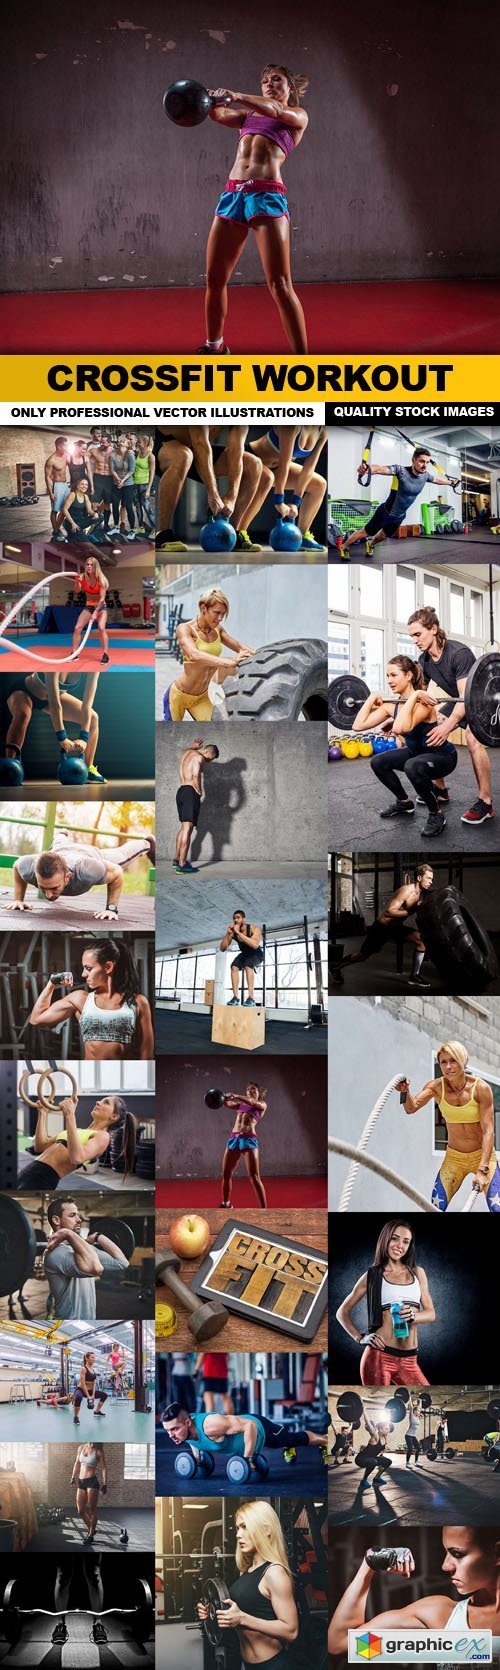 CrossFit Workout - 25 HQ Images